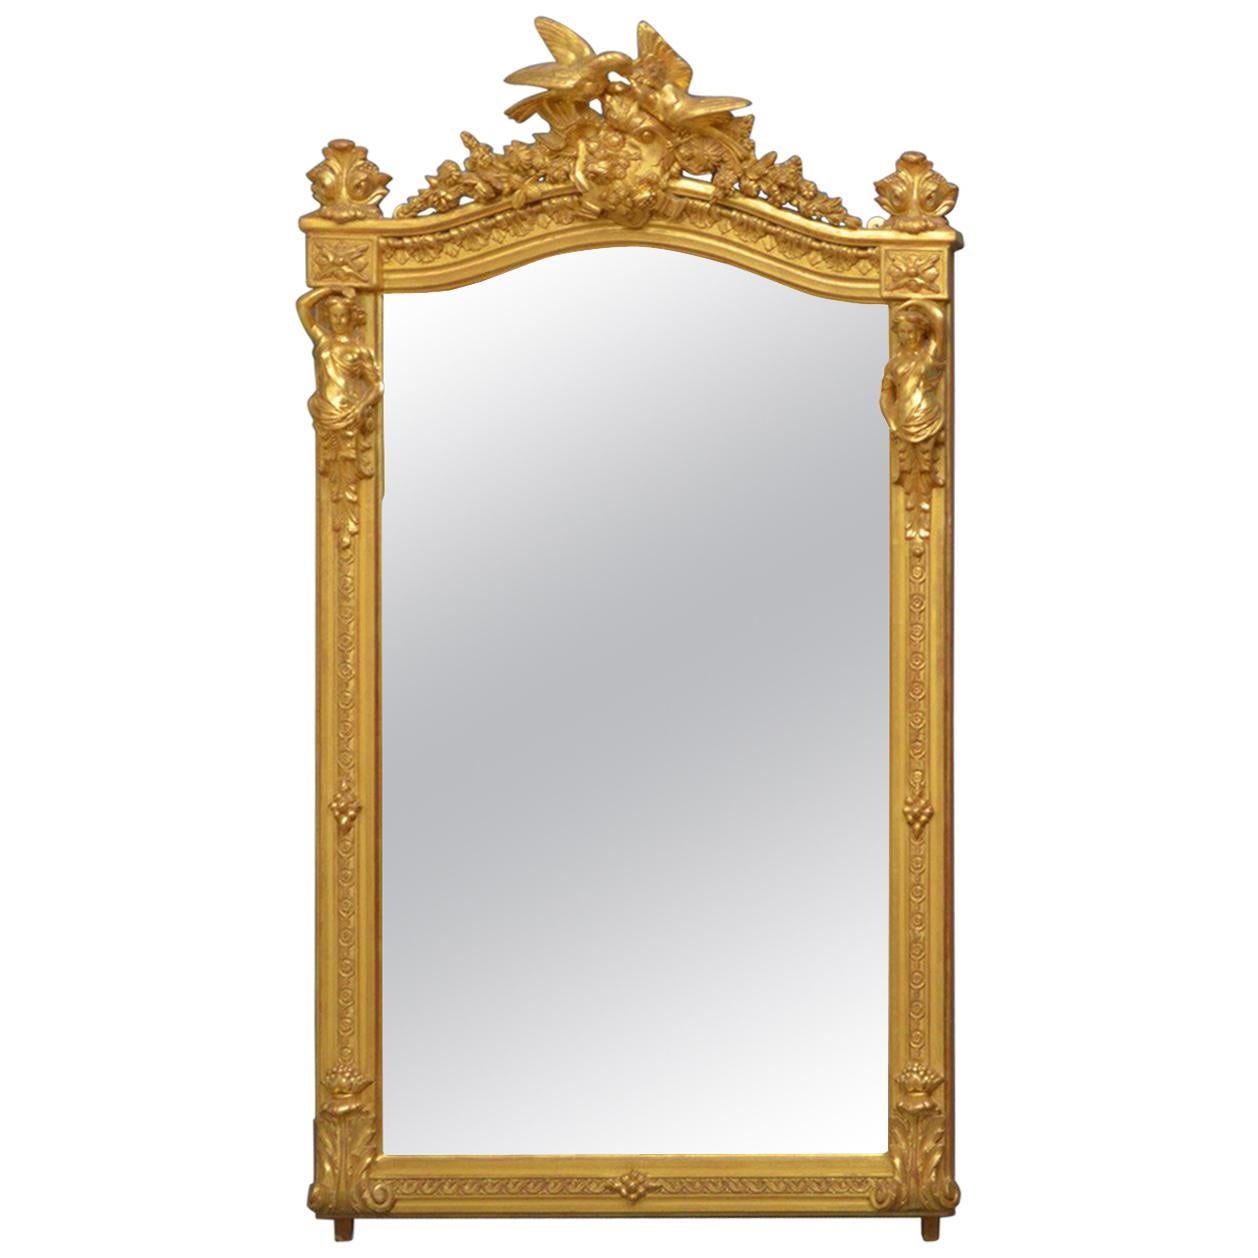 Superb Early 19th Century Giltwood Pier Mirror